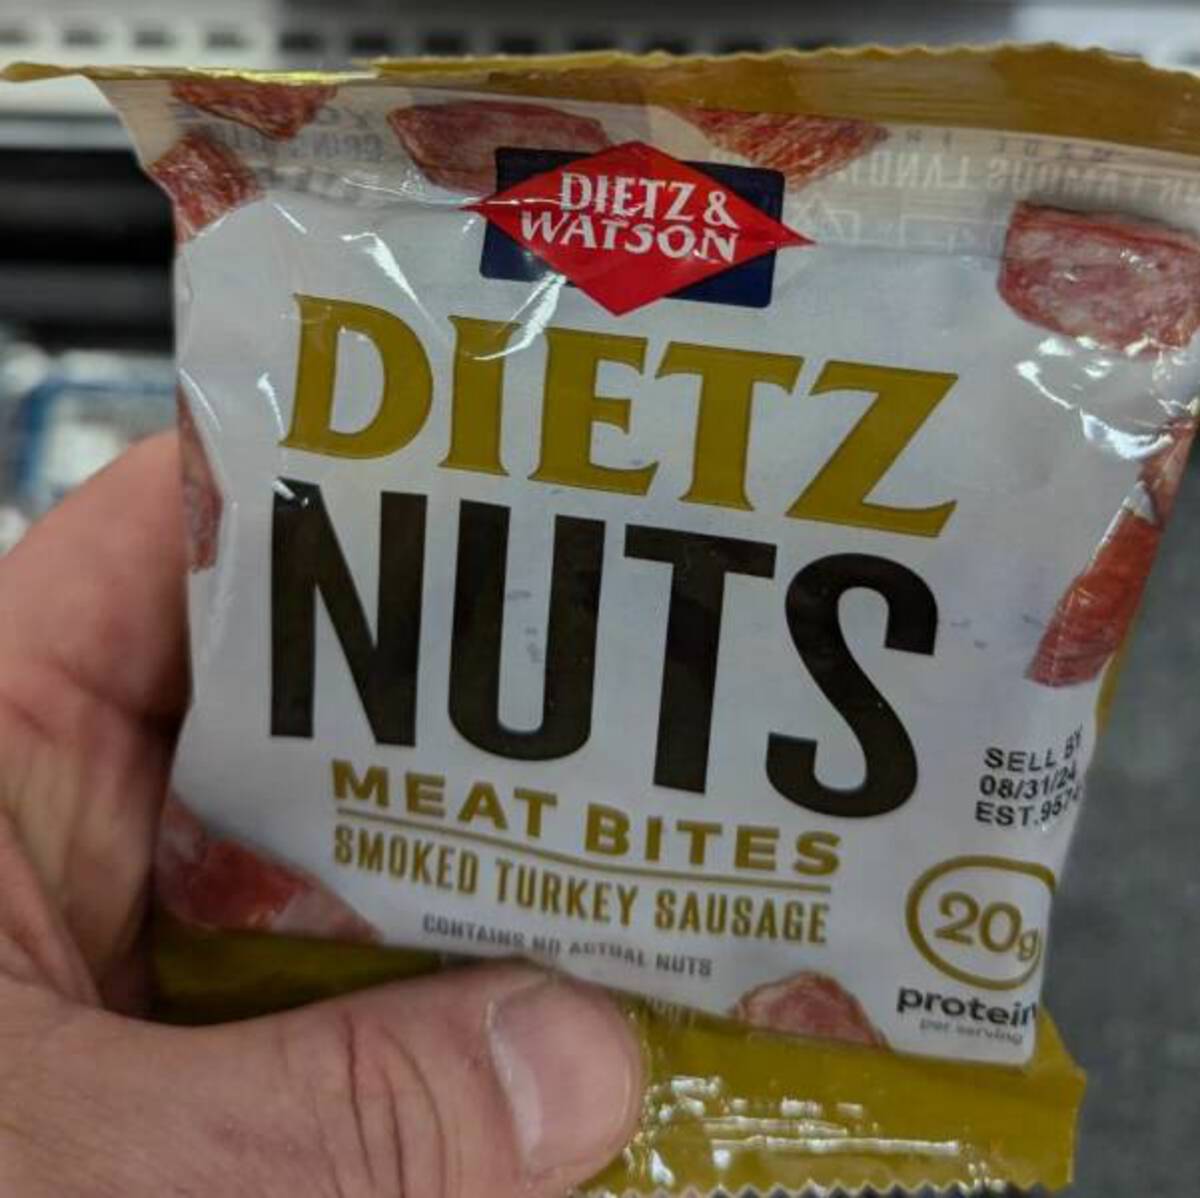 convenience food - 21193 Dietz & Watson Dietz Nuts Meat Bites Smoked Turkey Sausage Contains No Actual Nuts Sell 08312 Est.957 209 protei per serving